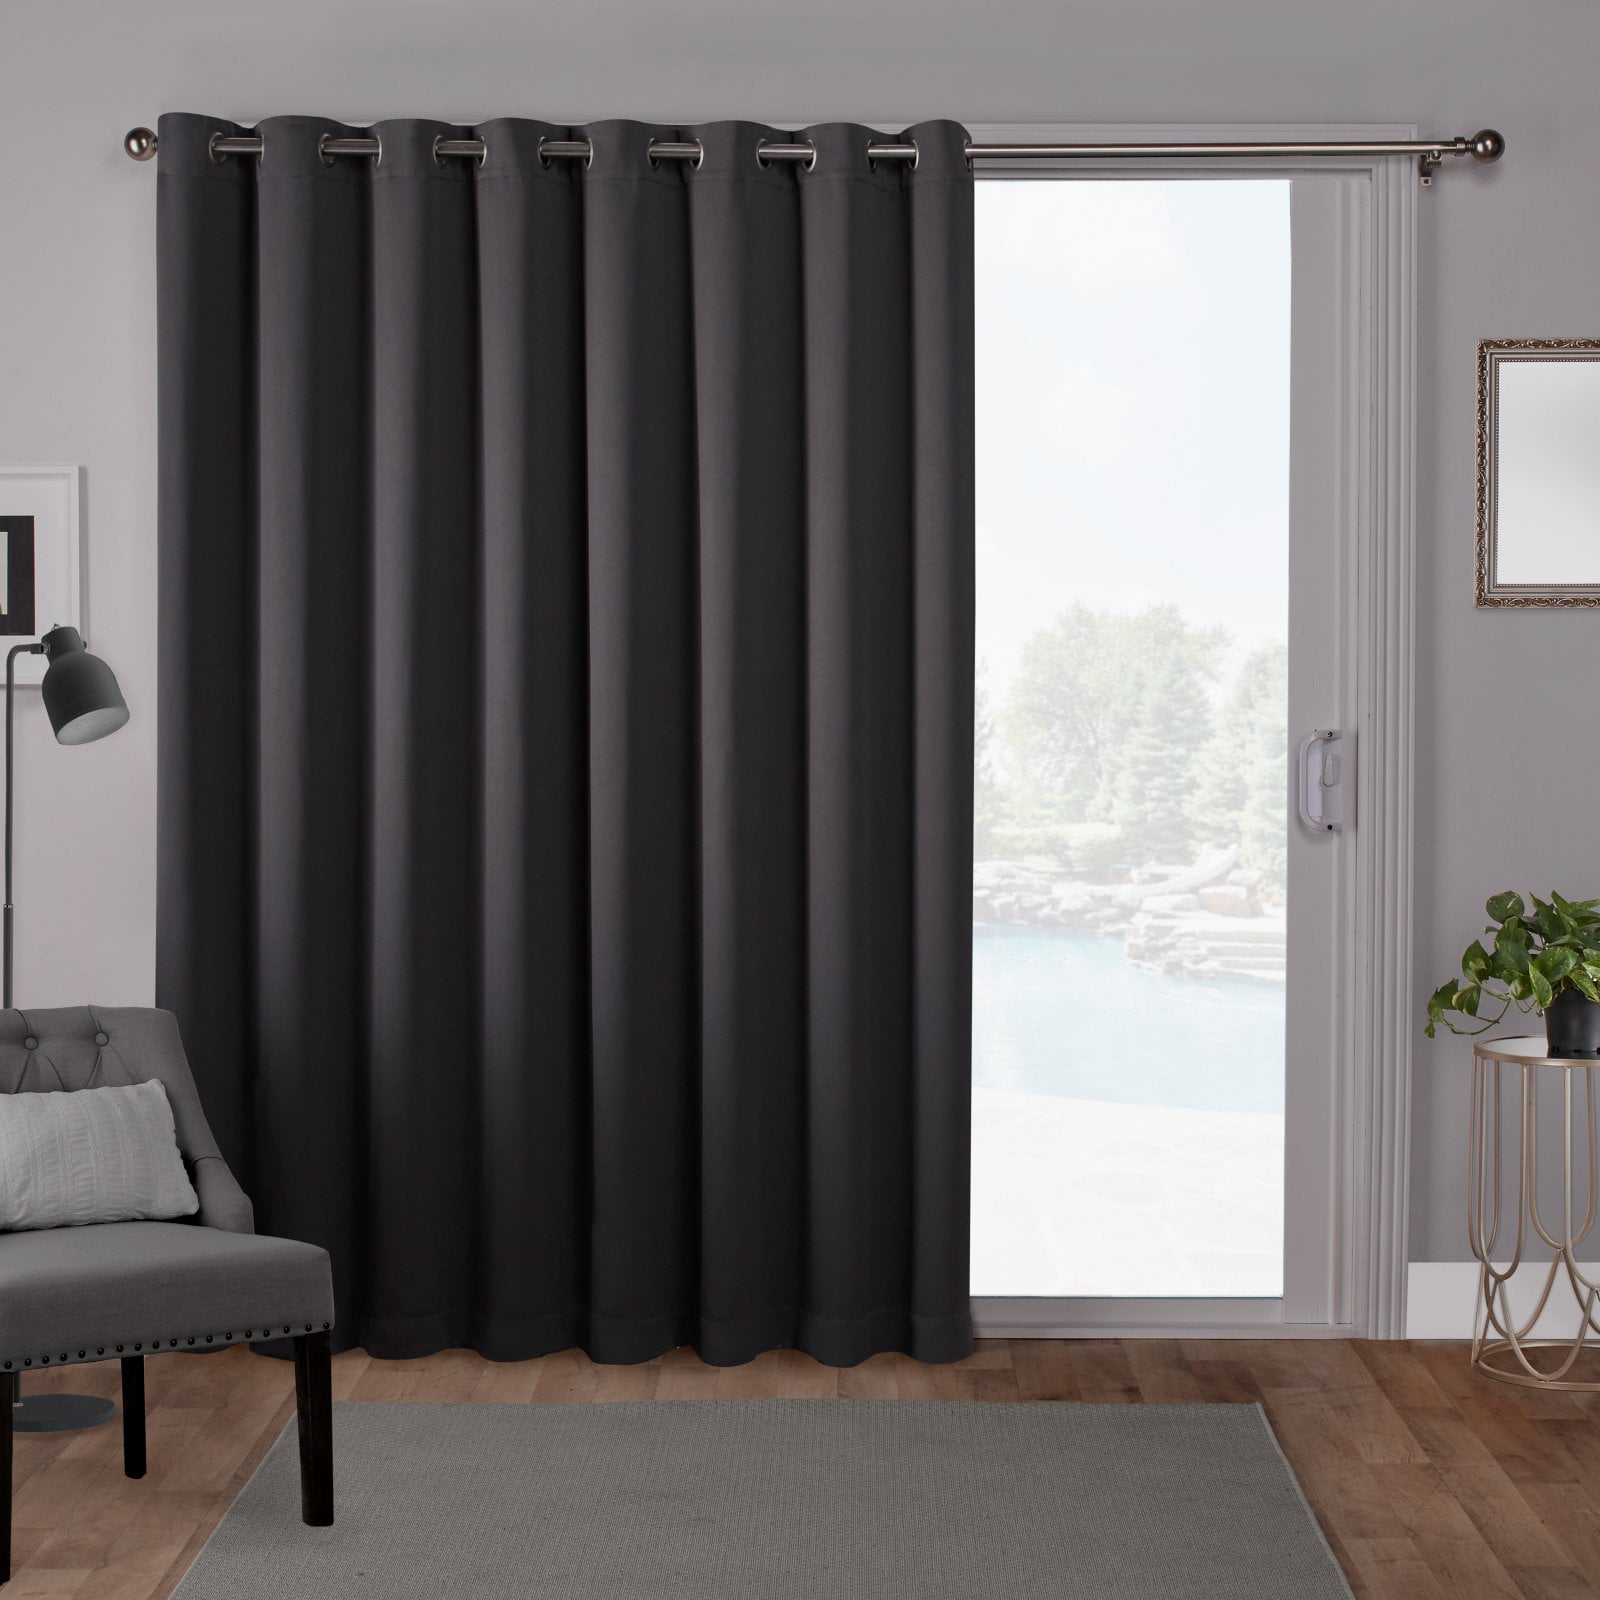 2 Count Exclusive Home Curtains Sateen GT Twill Woven Room Darkening Blackout Grommet Top Curtain Panel Pair Chili 52x84